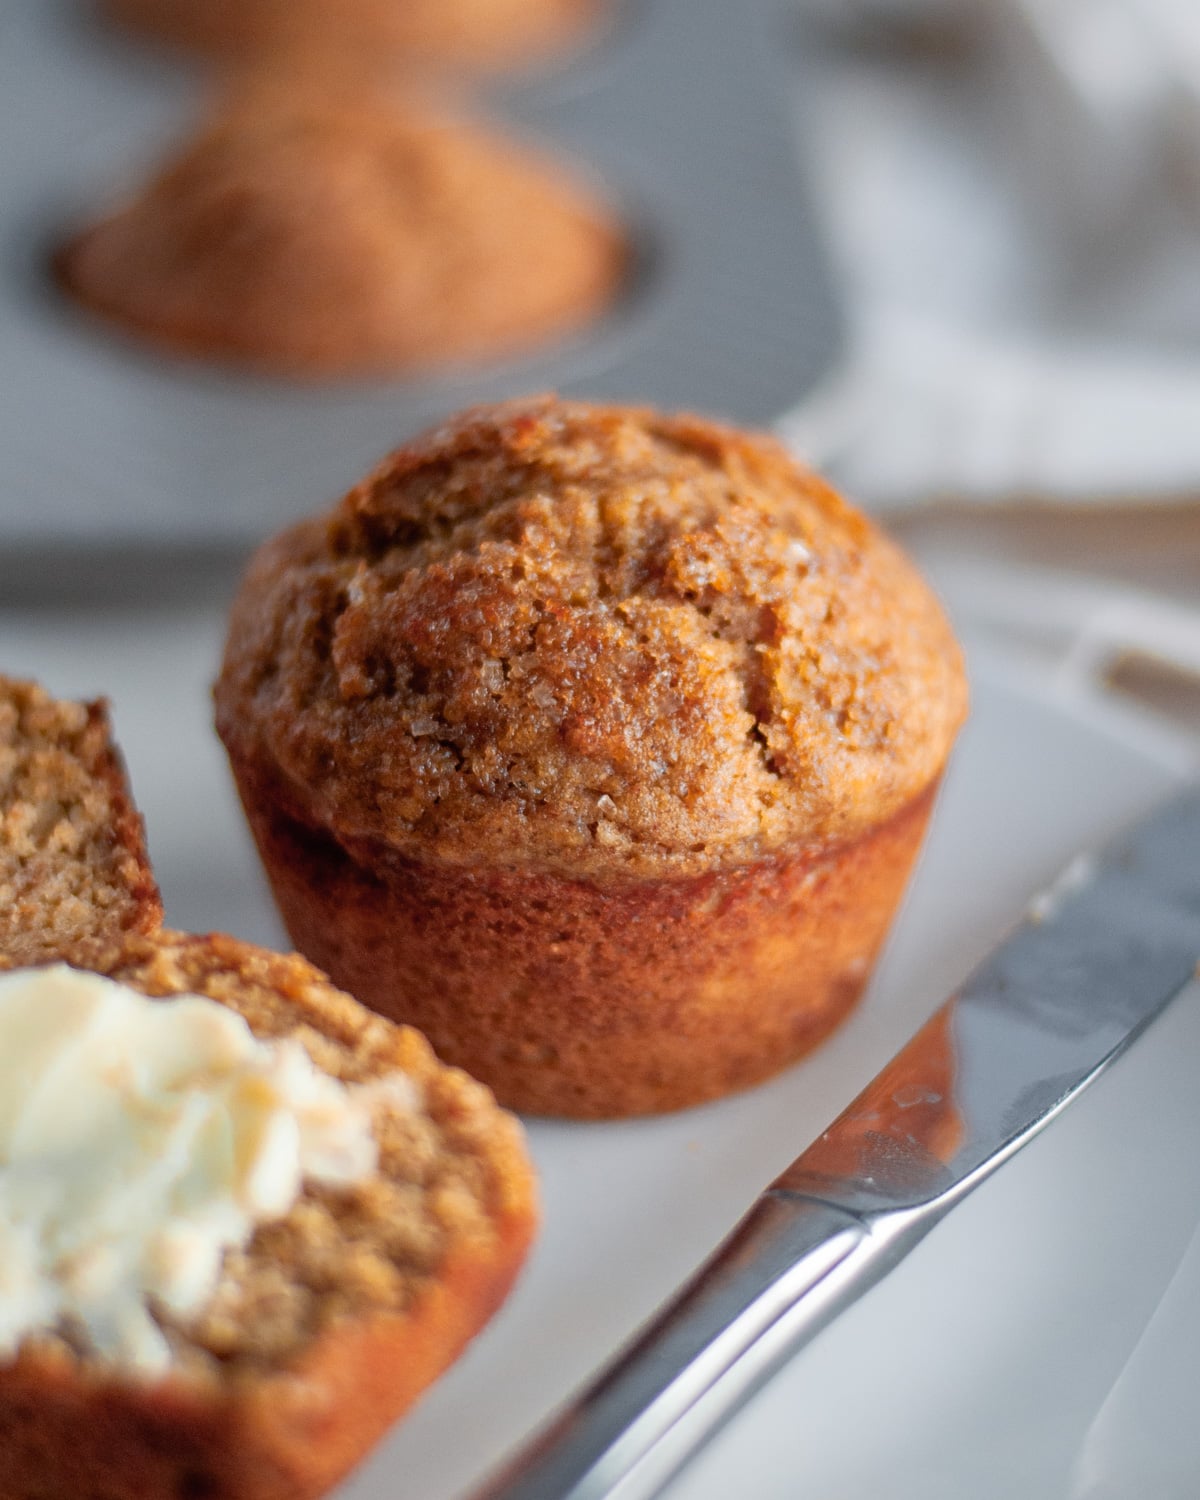 Close up of a full wheat germ muffin on a white serving plate with a buttered muffin in the foreground.